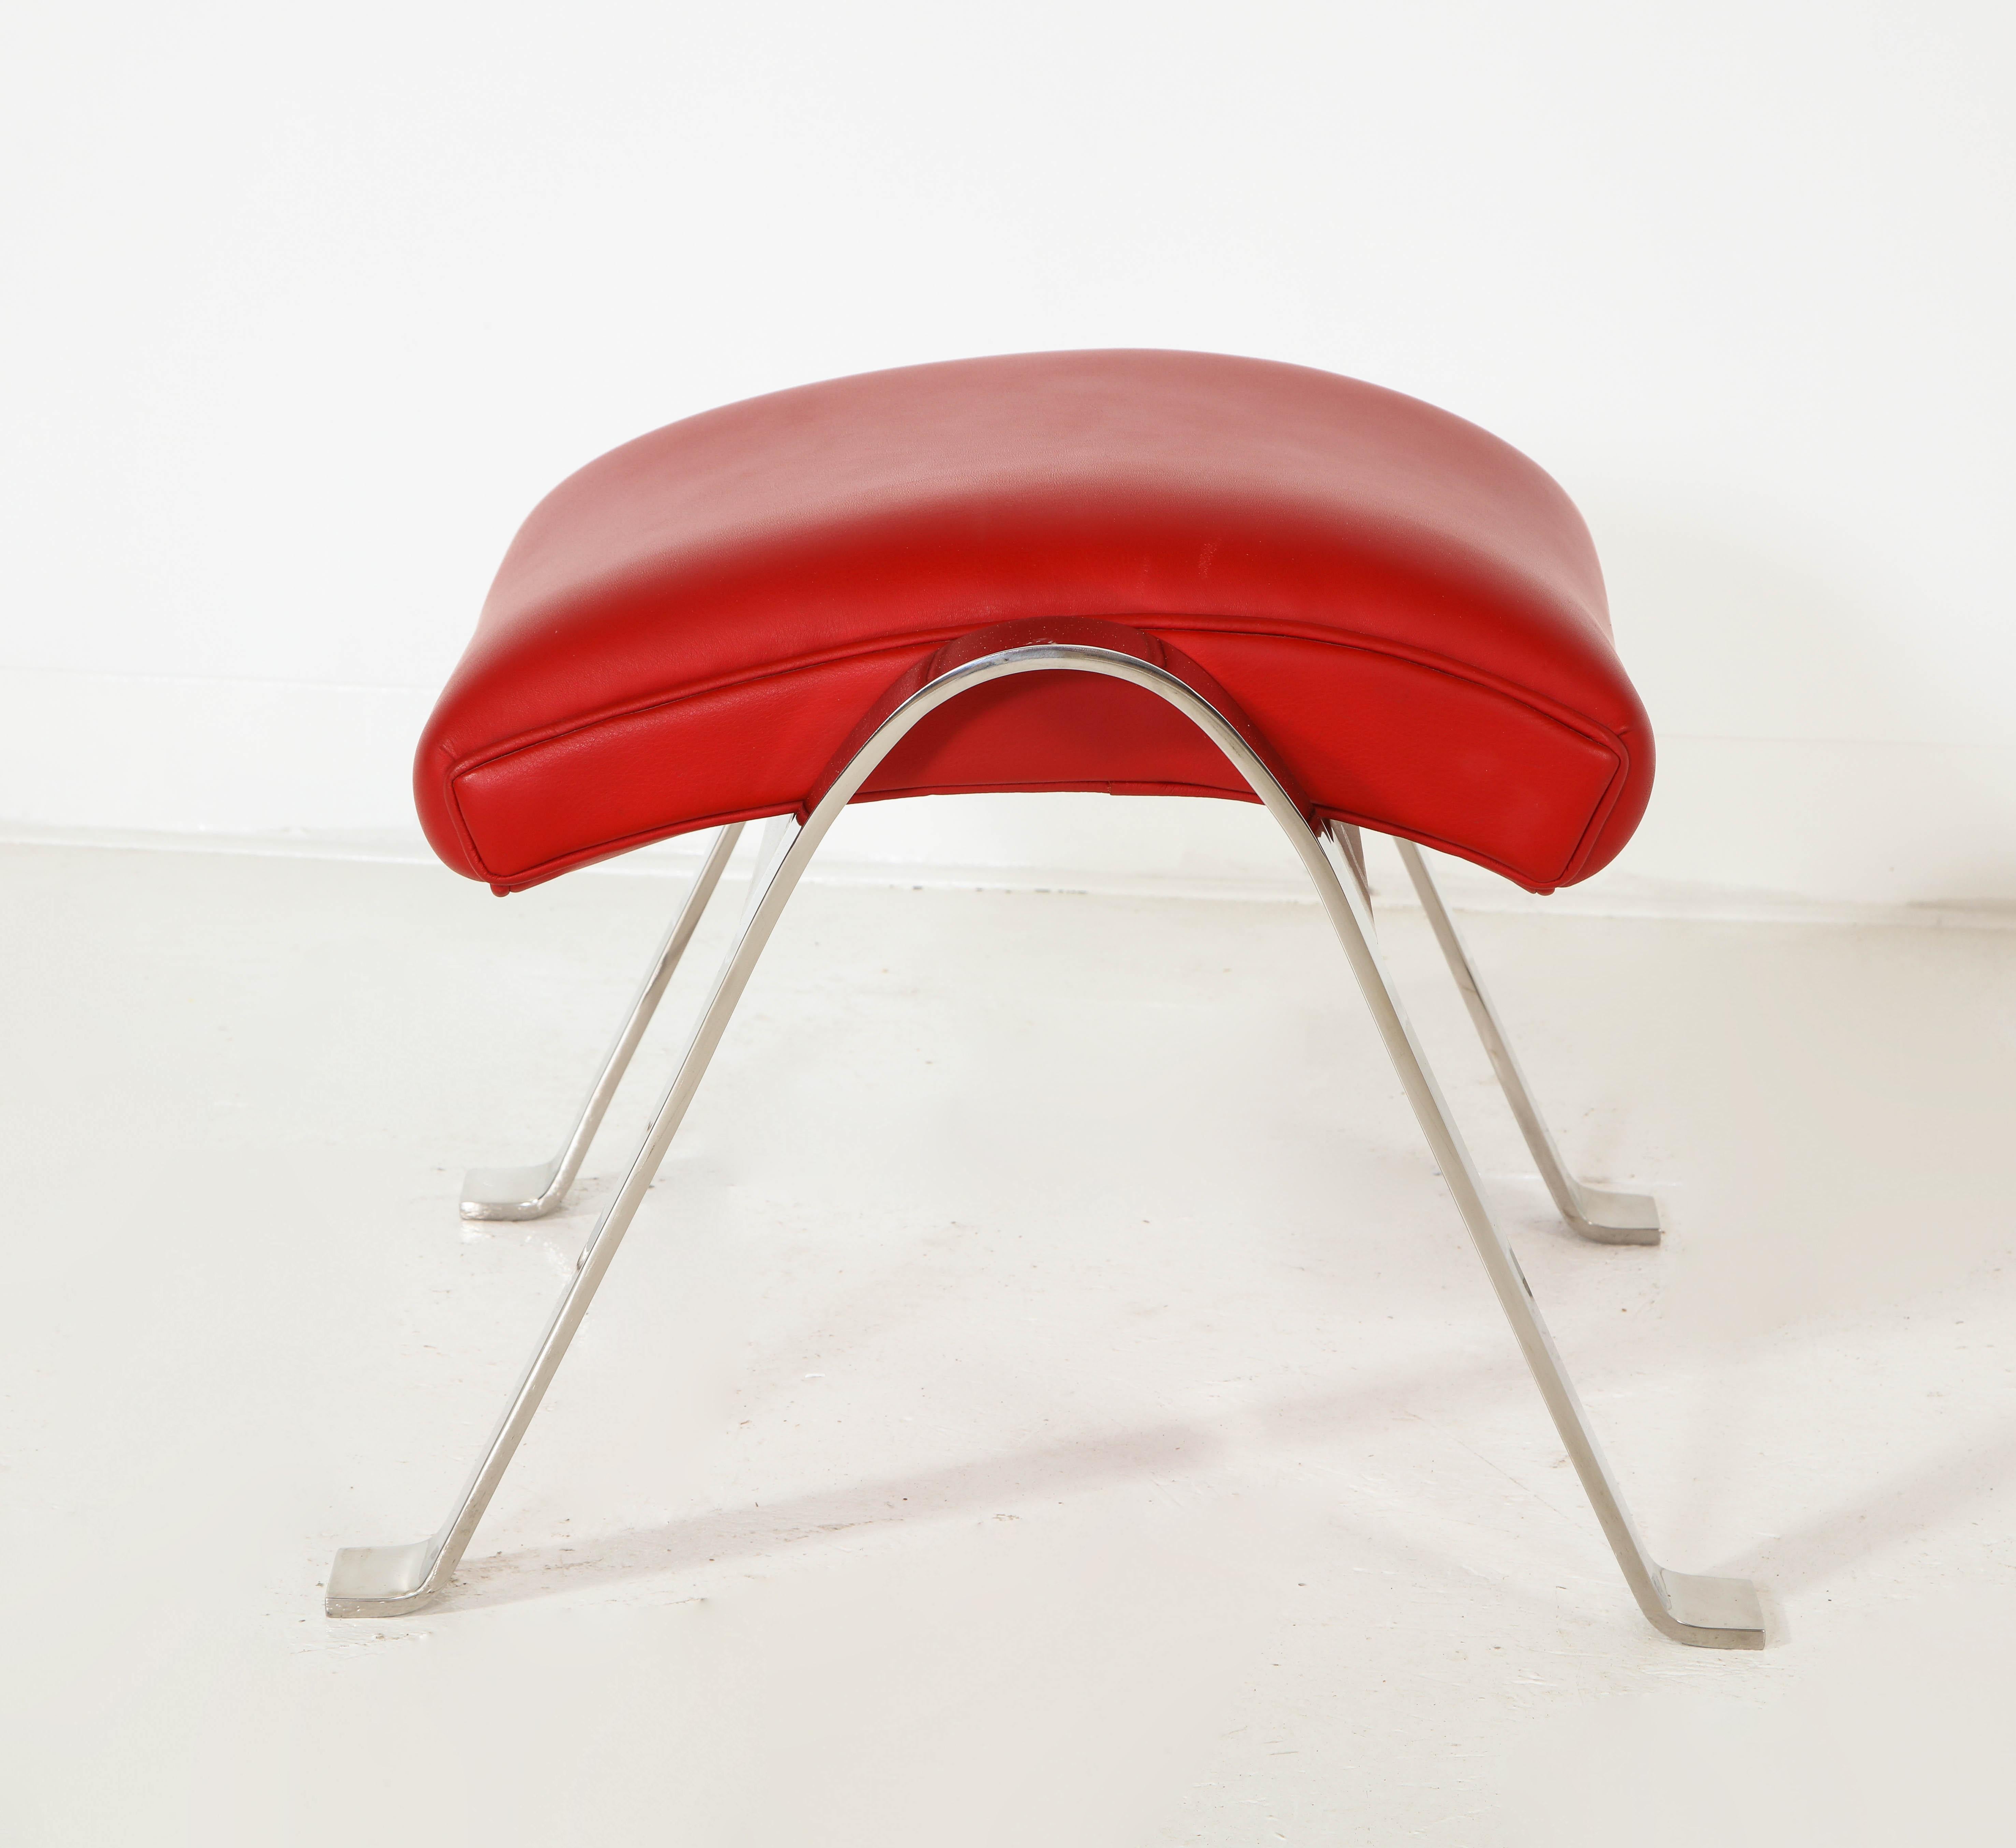 Modern Foot Stool in Red Offered by Vladimir Kagan Design Group For Sale